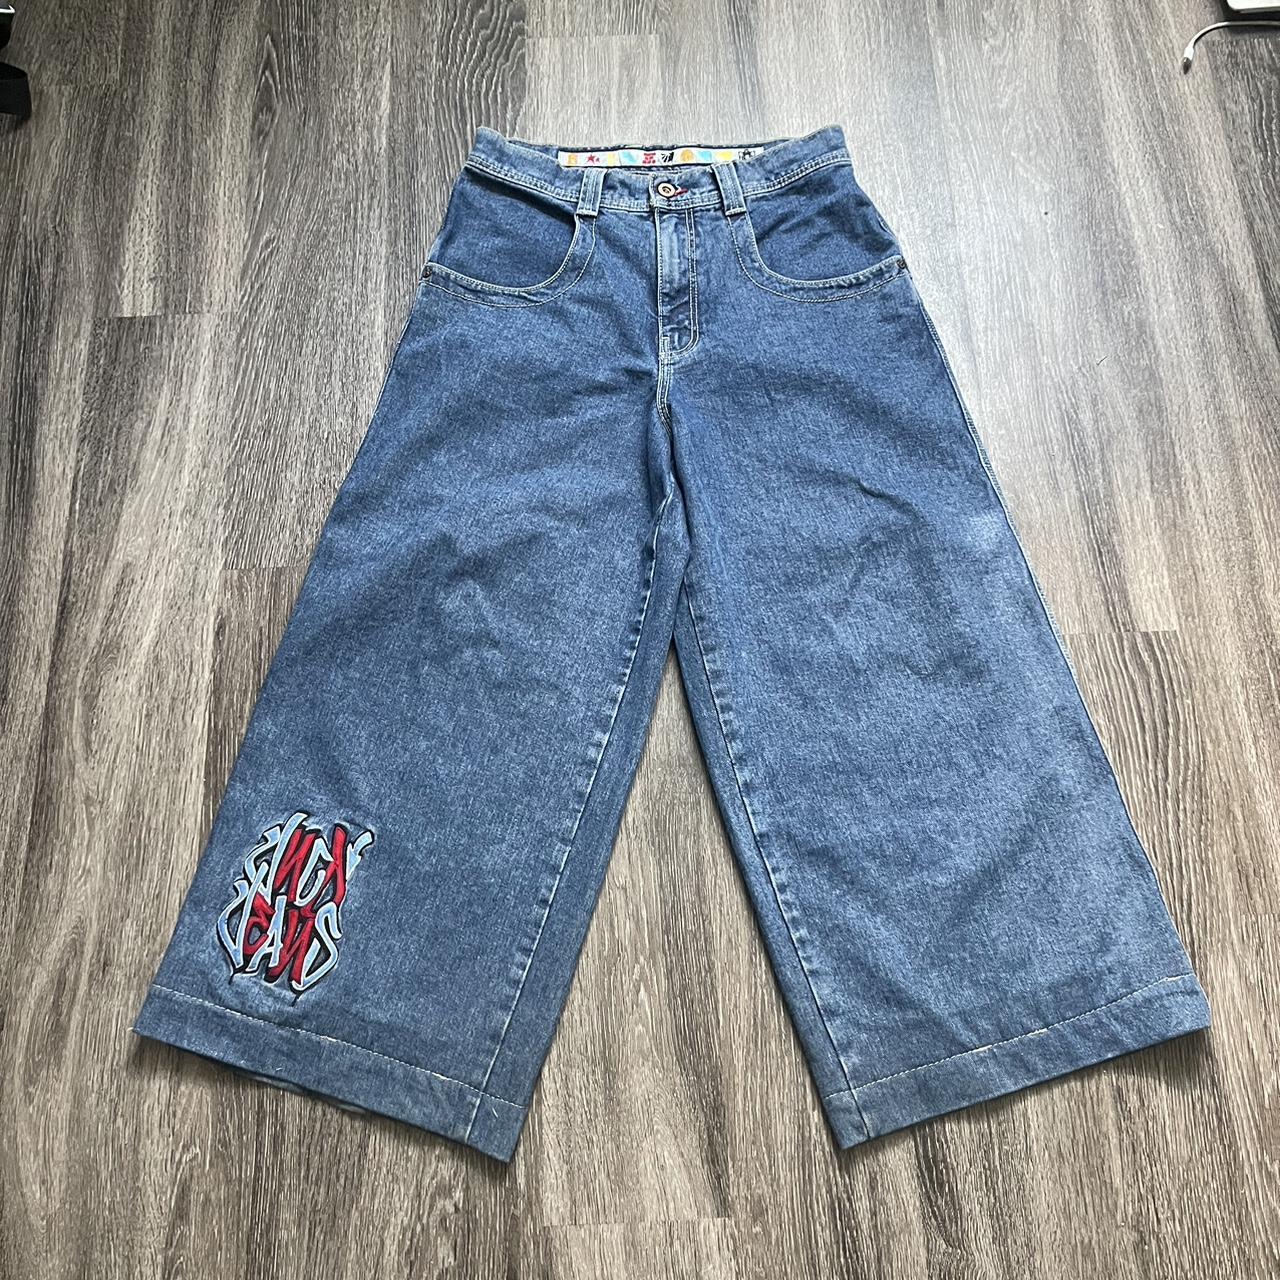 Very nice pair of JNCO Rollin’ 26” jeans :-) These... - Depop